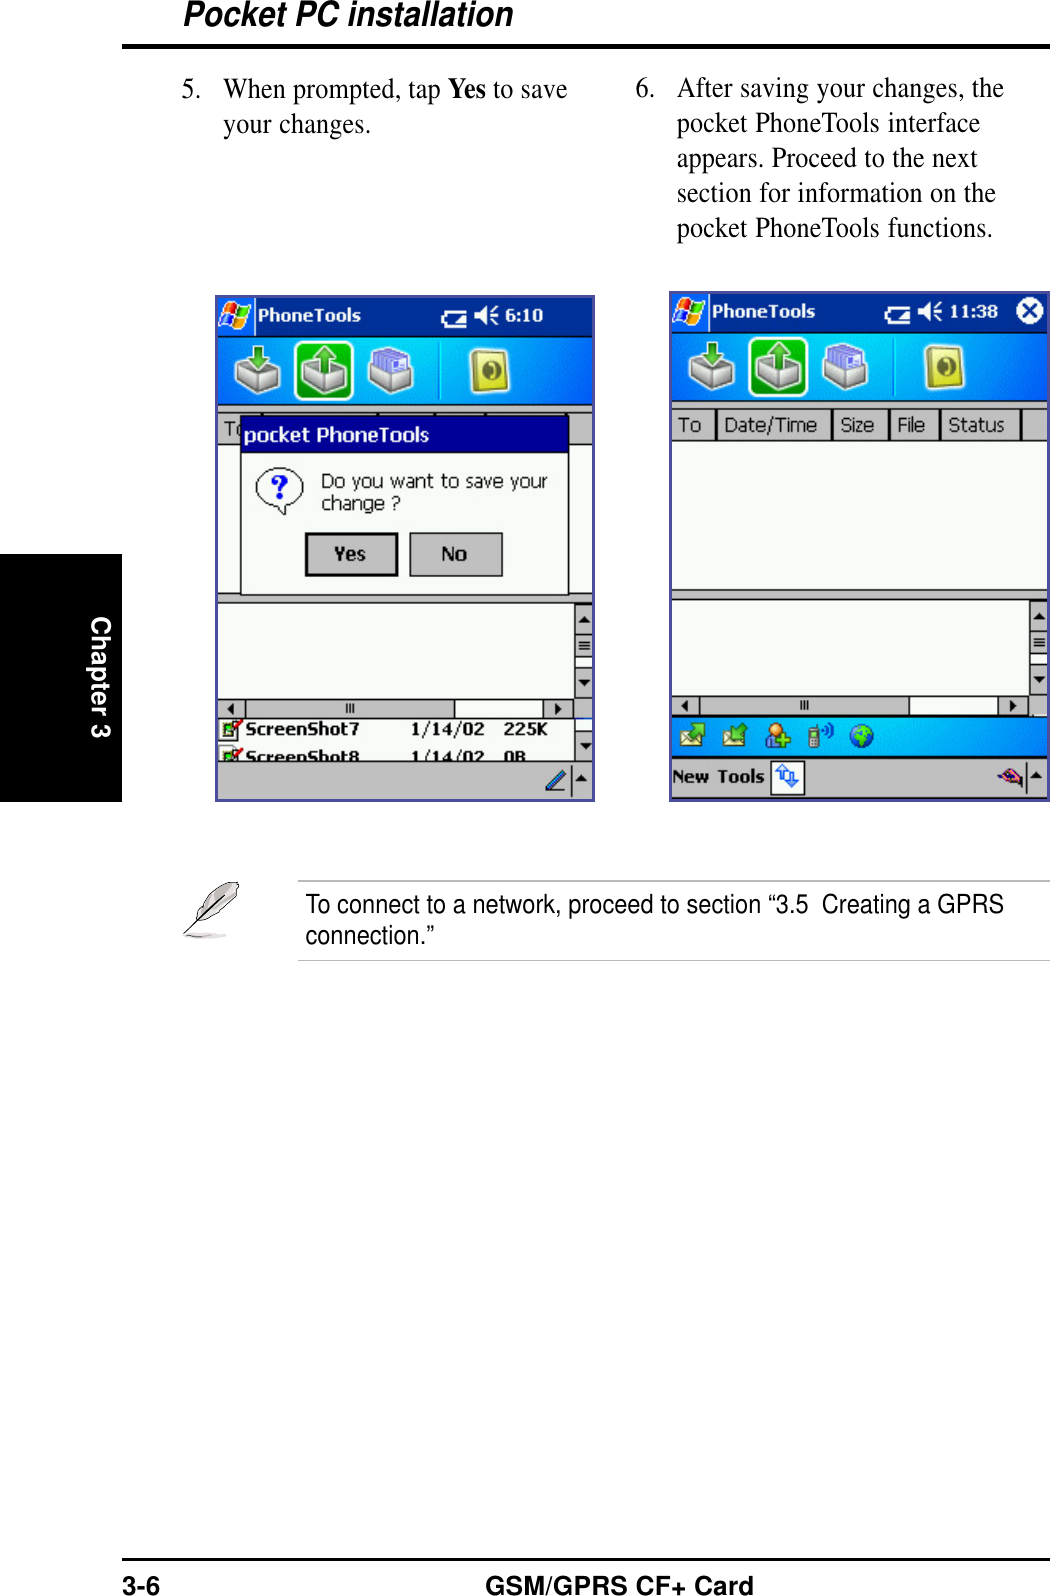 Pocket PC installationChapter 33-6 GSM/GPRS CF+ Card5. When prompted, tap Yes to saveyour changes.6. After saving your changes, thepocket PhoneTools interfaceappears. Proceed to the nextsection for information on thepocket PhoneTools functions.To connect to a network, proceed to section “3.5  Creating a GPRSconnection.”